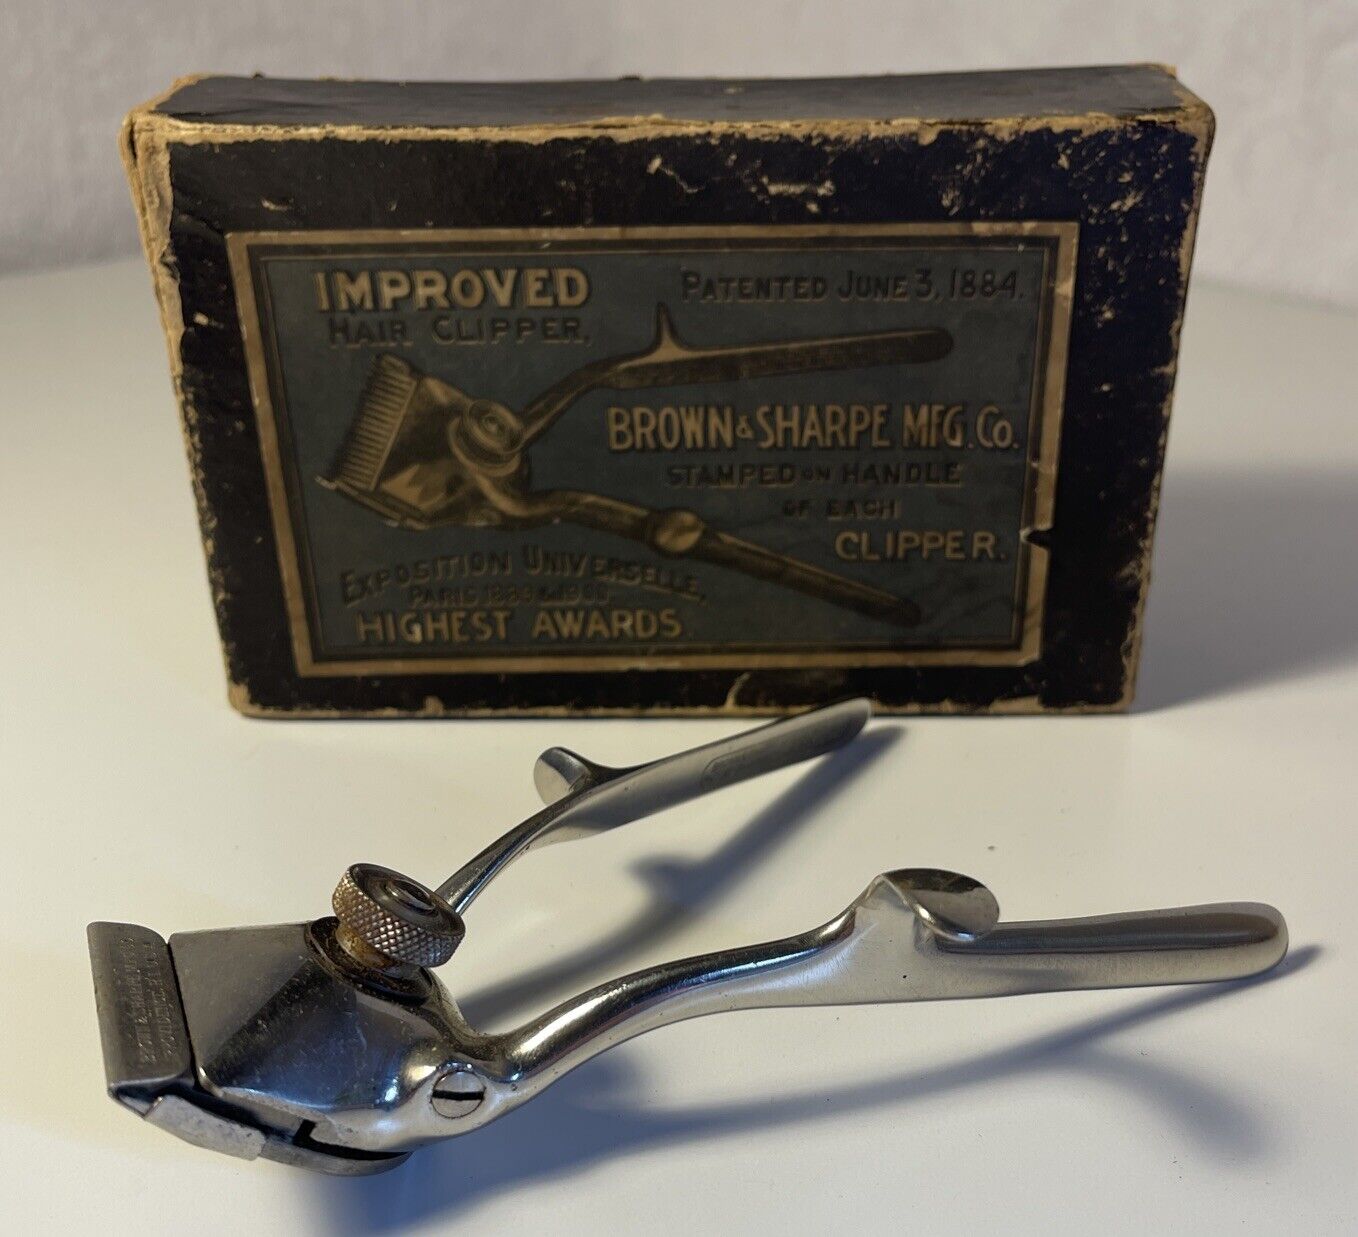 Antique Brown & Sharpe Mfg Co Improved Hair Clipper Barber Tools